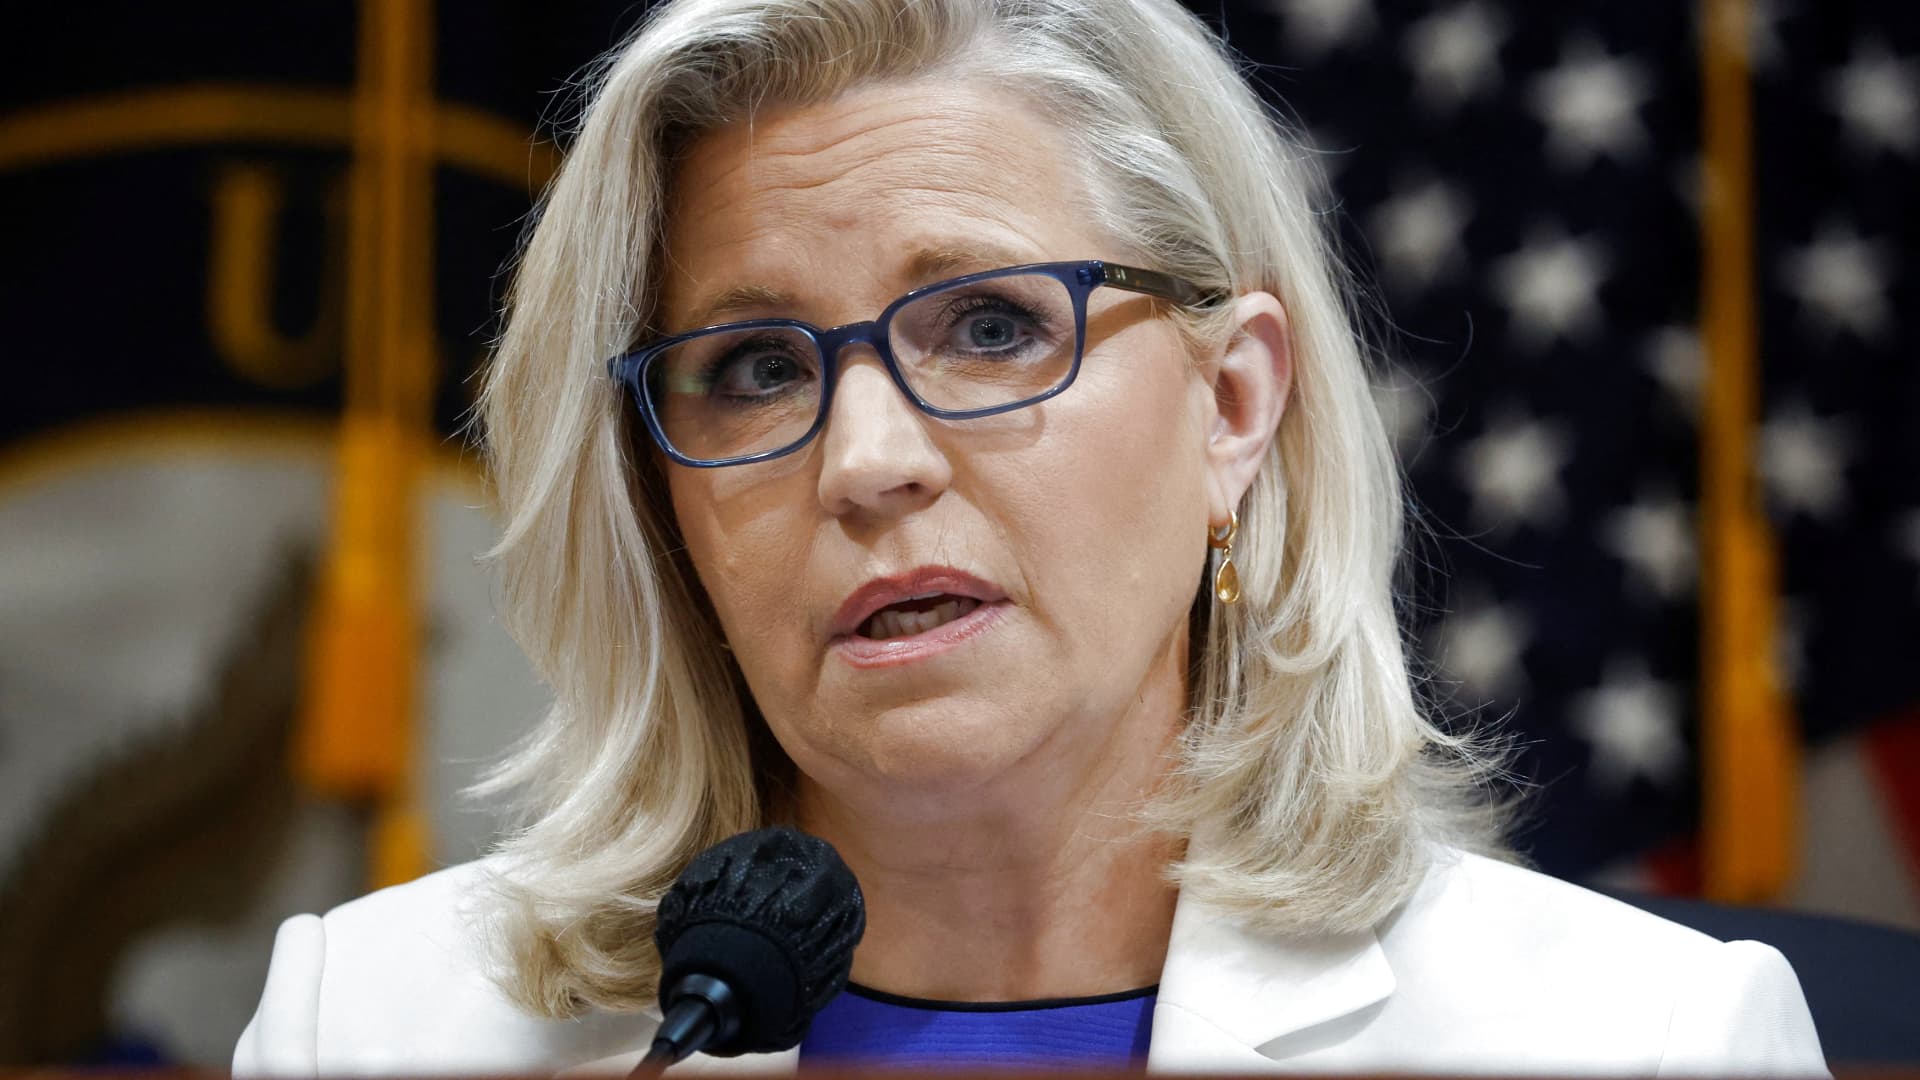 Vice Chair U.S. Representative Liz Cheney (R-WY) speaks during a public hearing of the U.S. House Select Committee to investigate the January 6 Attack on the U.S. Capitol, on Capitol Hill, in Washington, U.S., July 21, 2022.